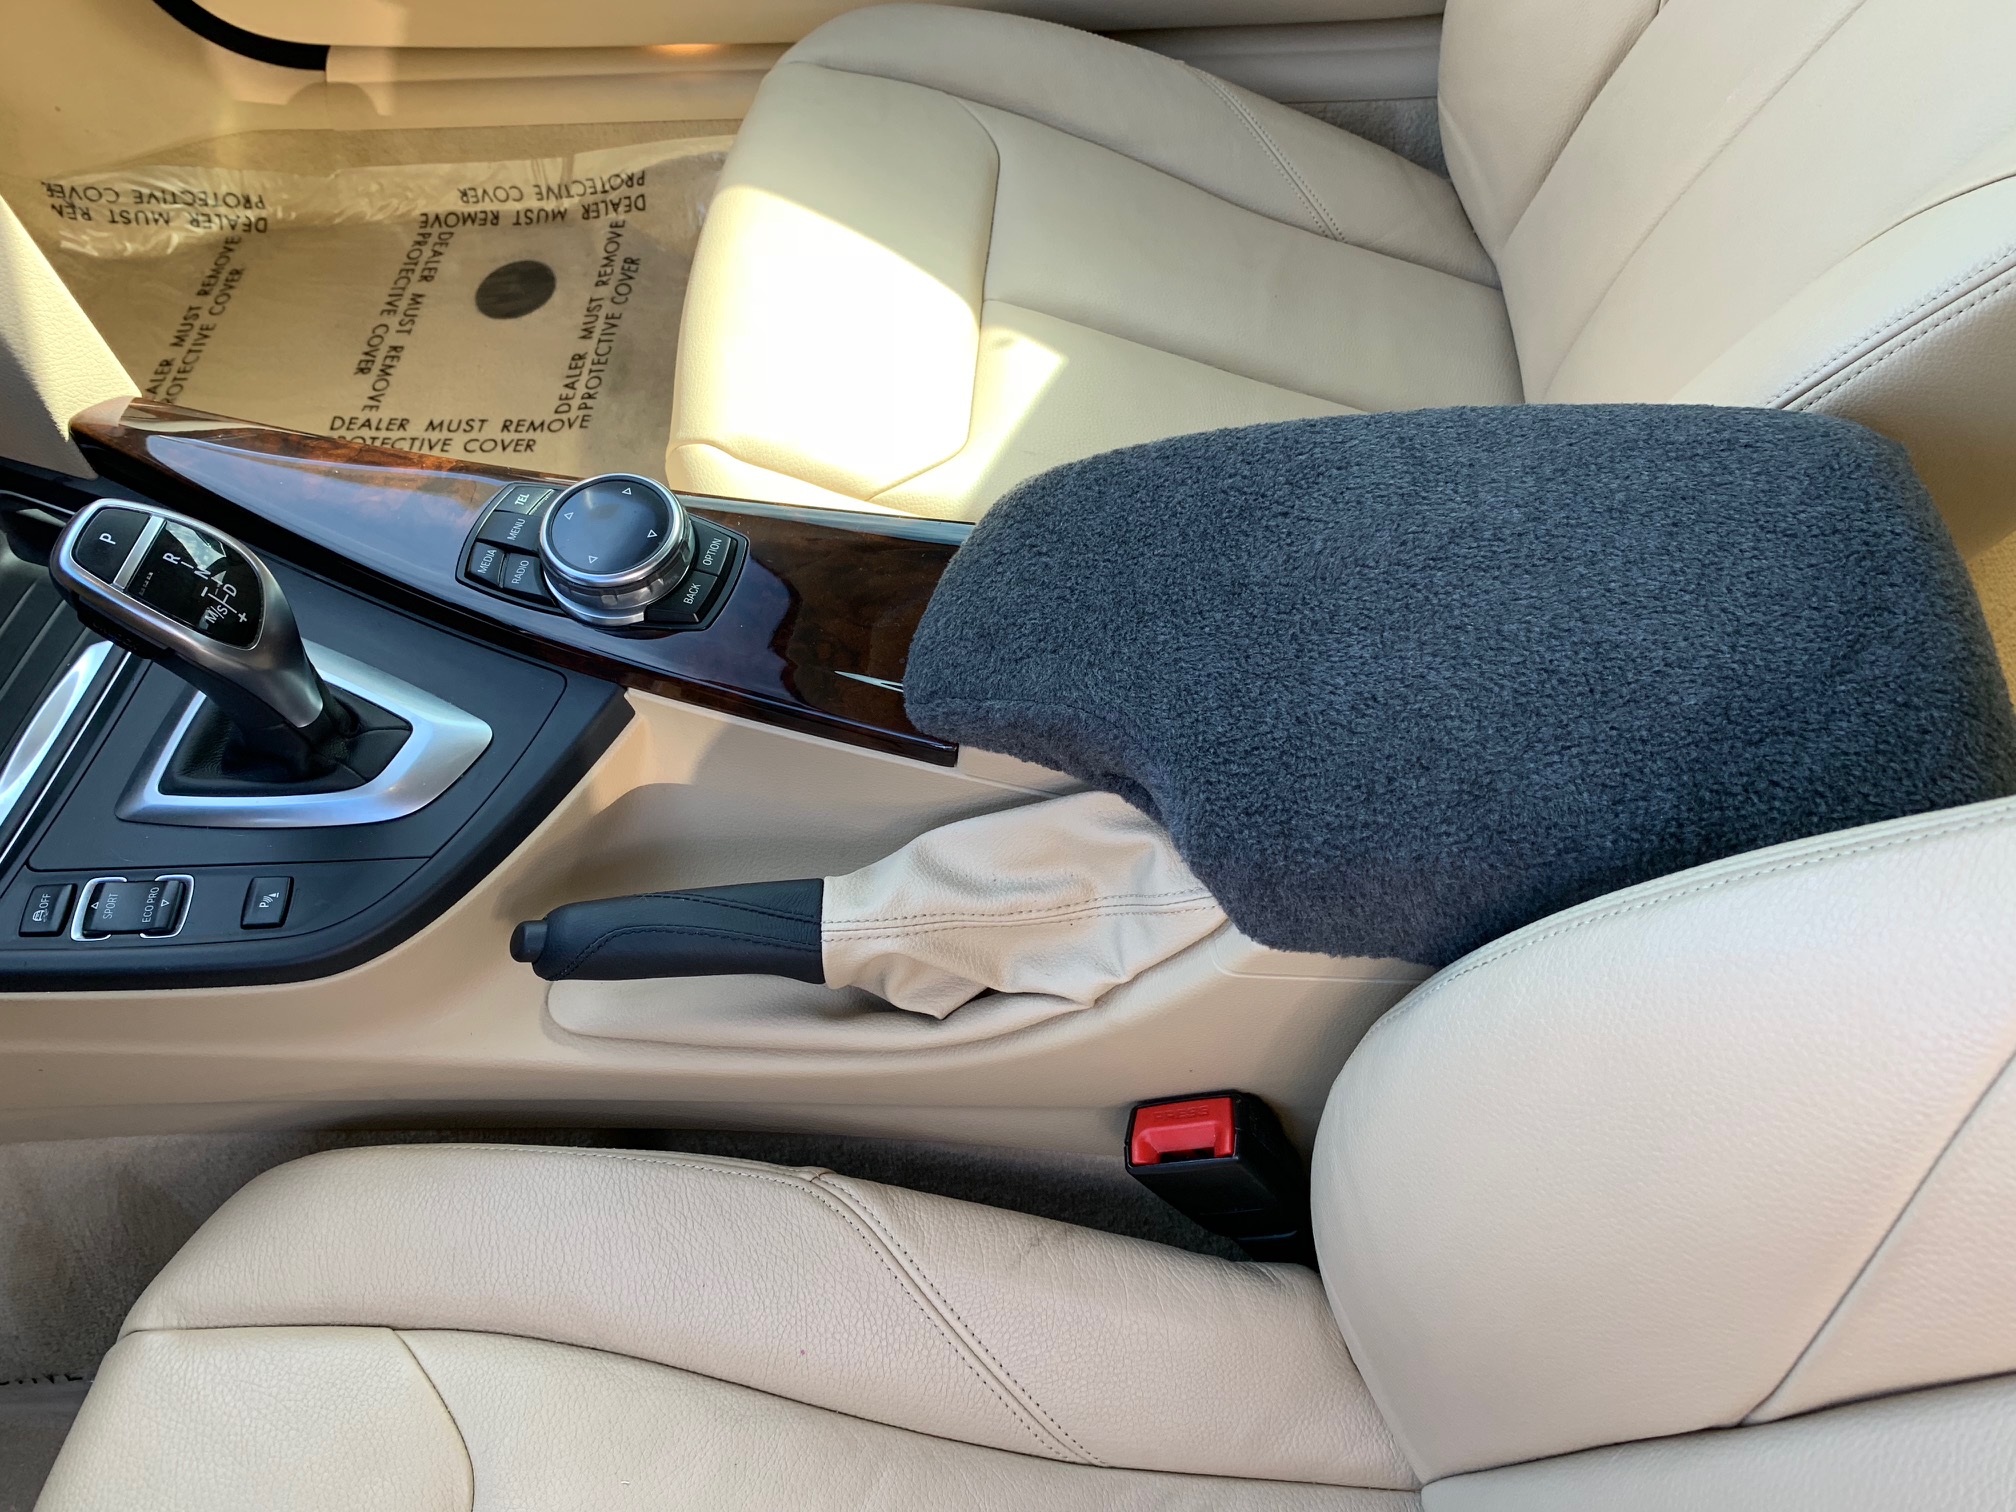 Buy Fleece Center Armrest Console Cover fits the BMW M4 Series 2015-2019 (All Trim Levels)